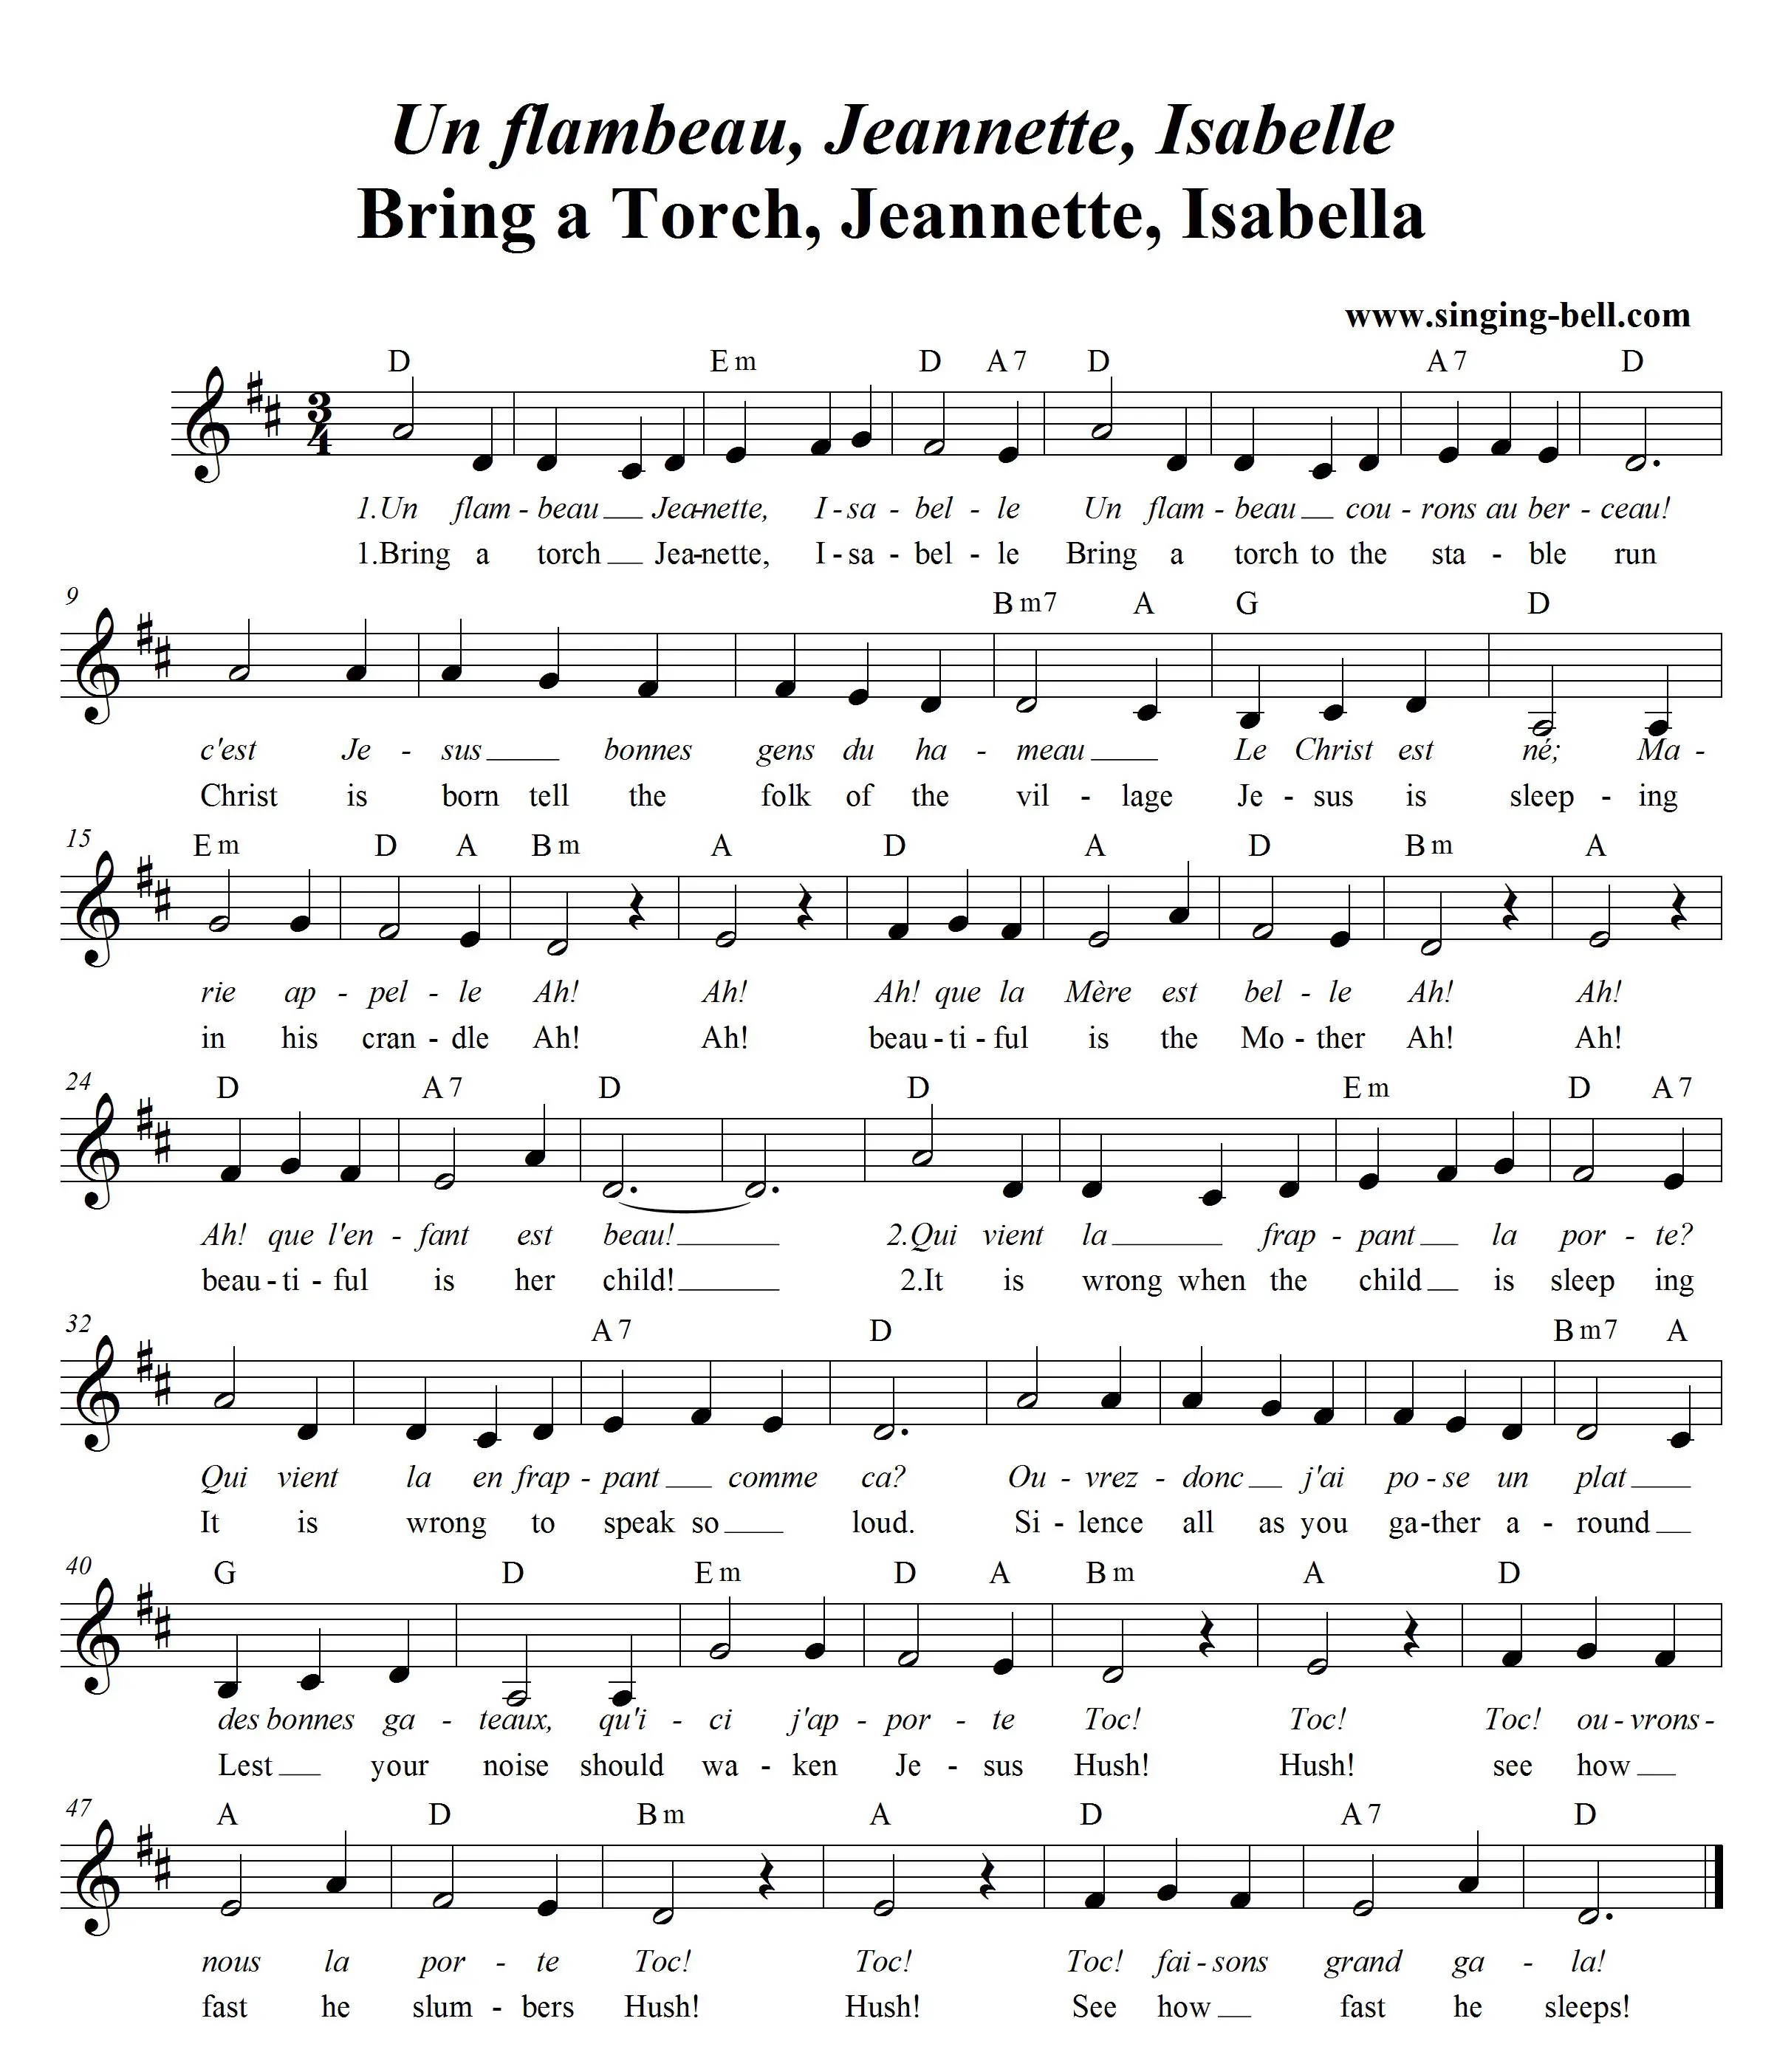 Bring a Torch, Jeanette, Isabella sheet music